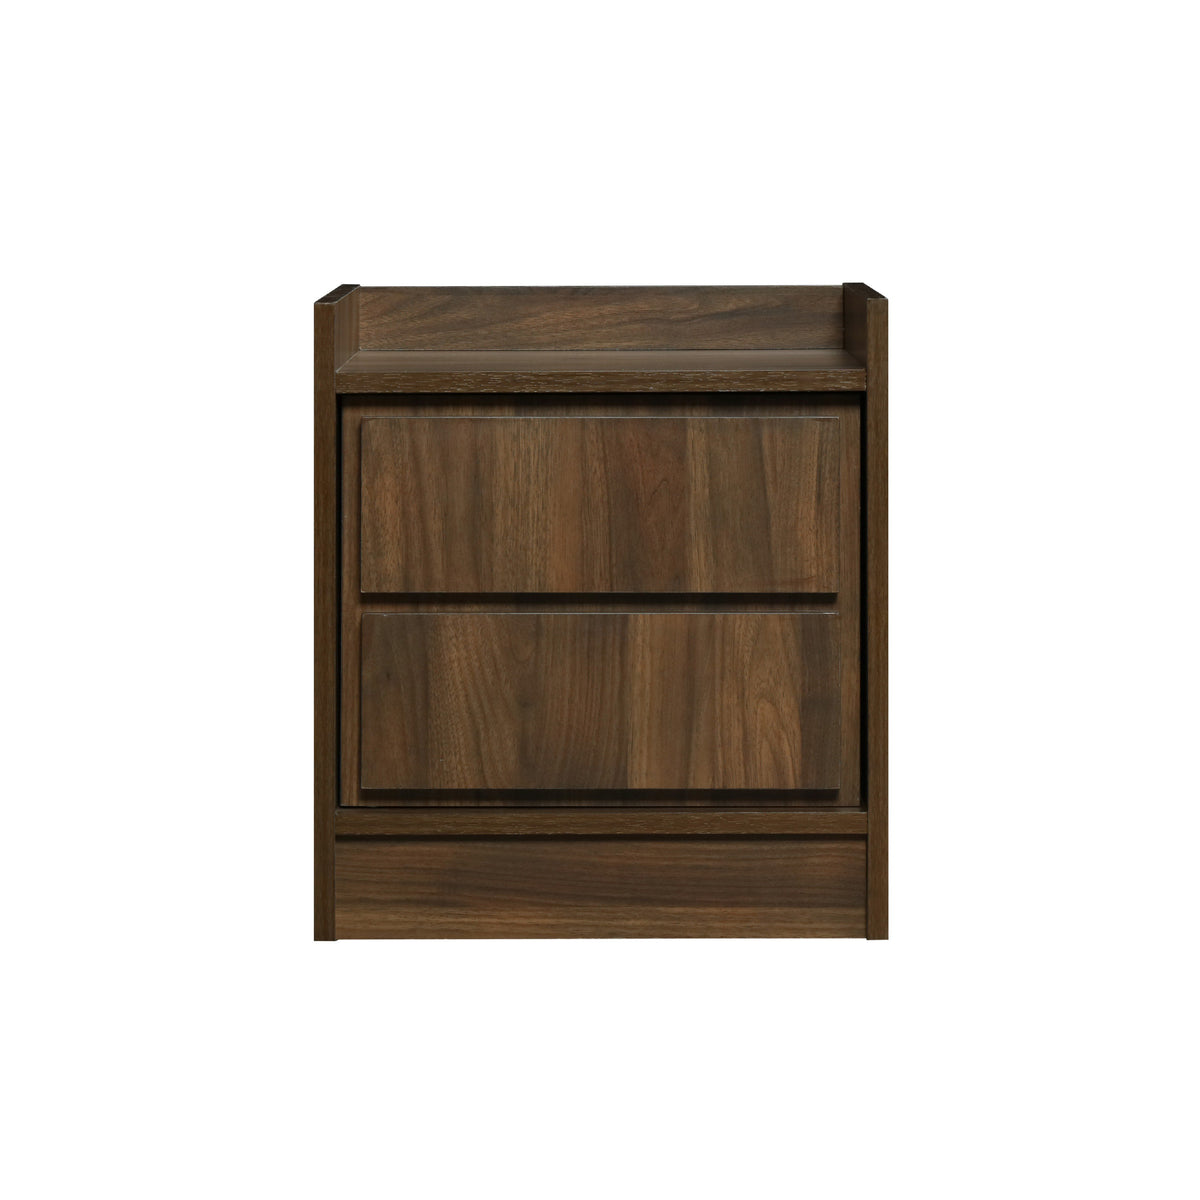 Transitional Nightstand with False Drawer Front and Woodgrain Details,Brown - BM215310